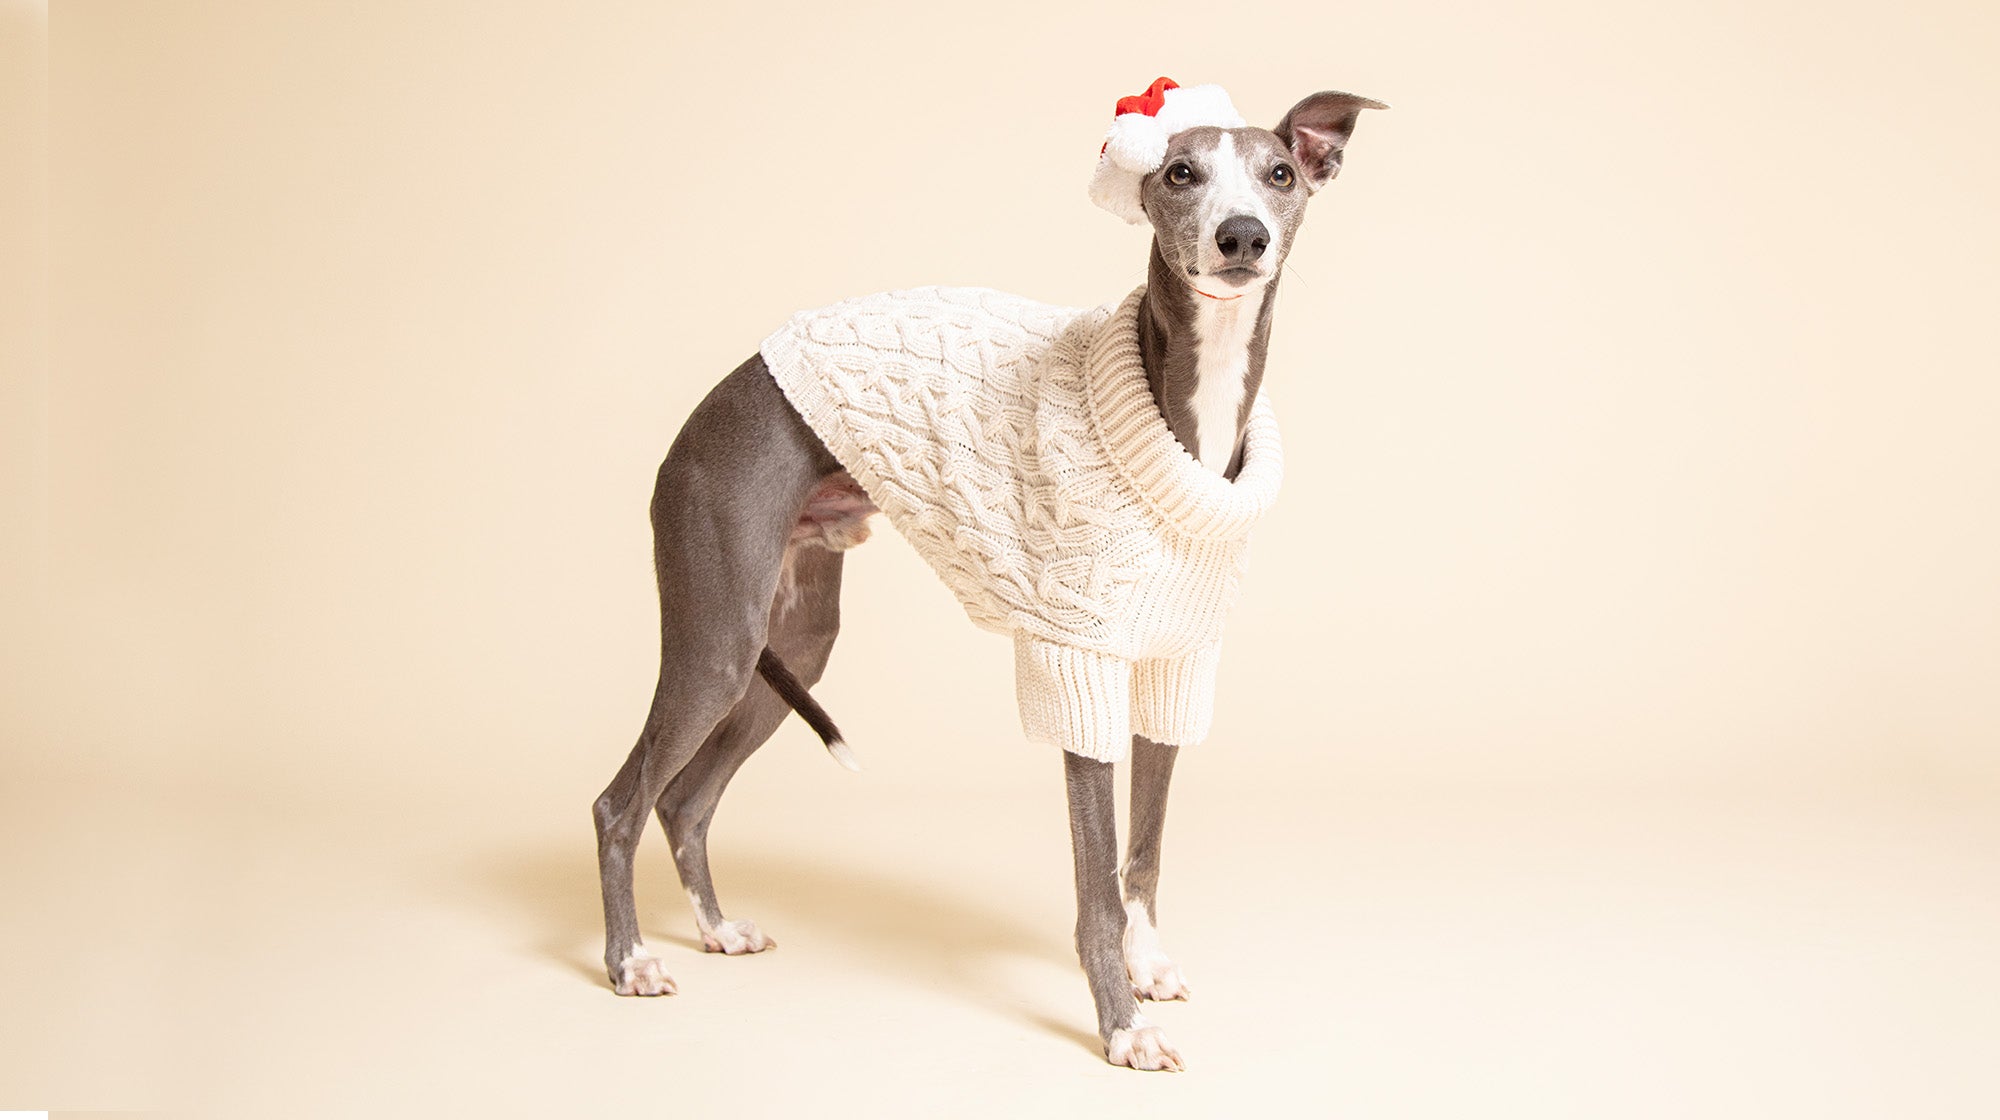 A Whippet dog in a knitted beige jumper, with a tiny Santa hat on its head, against a beige background